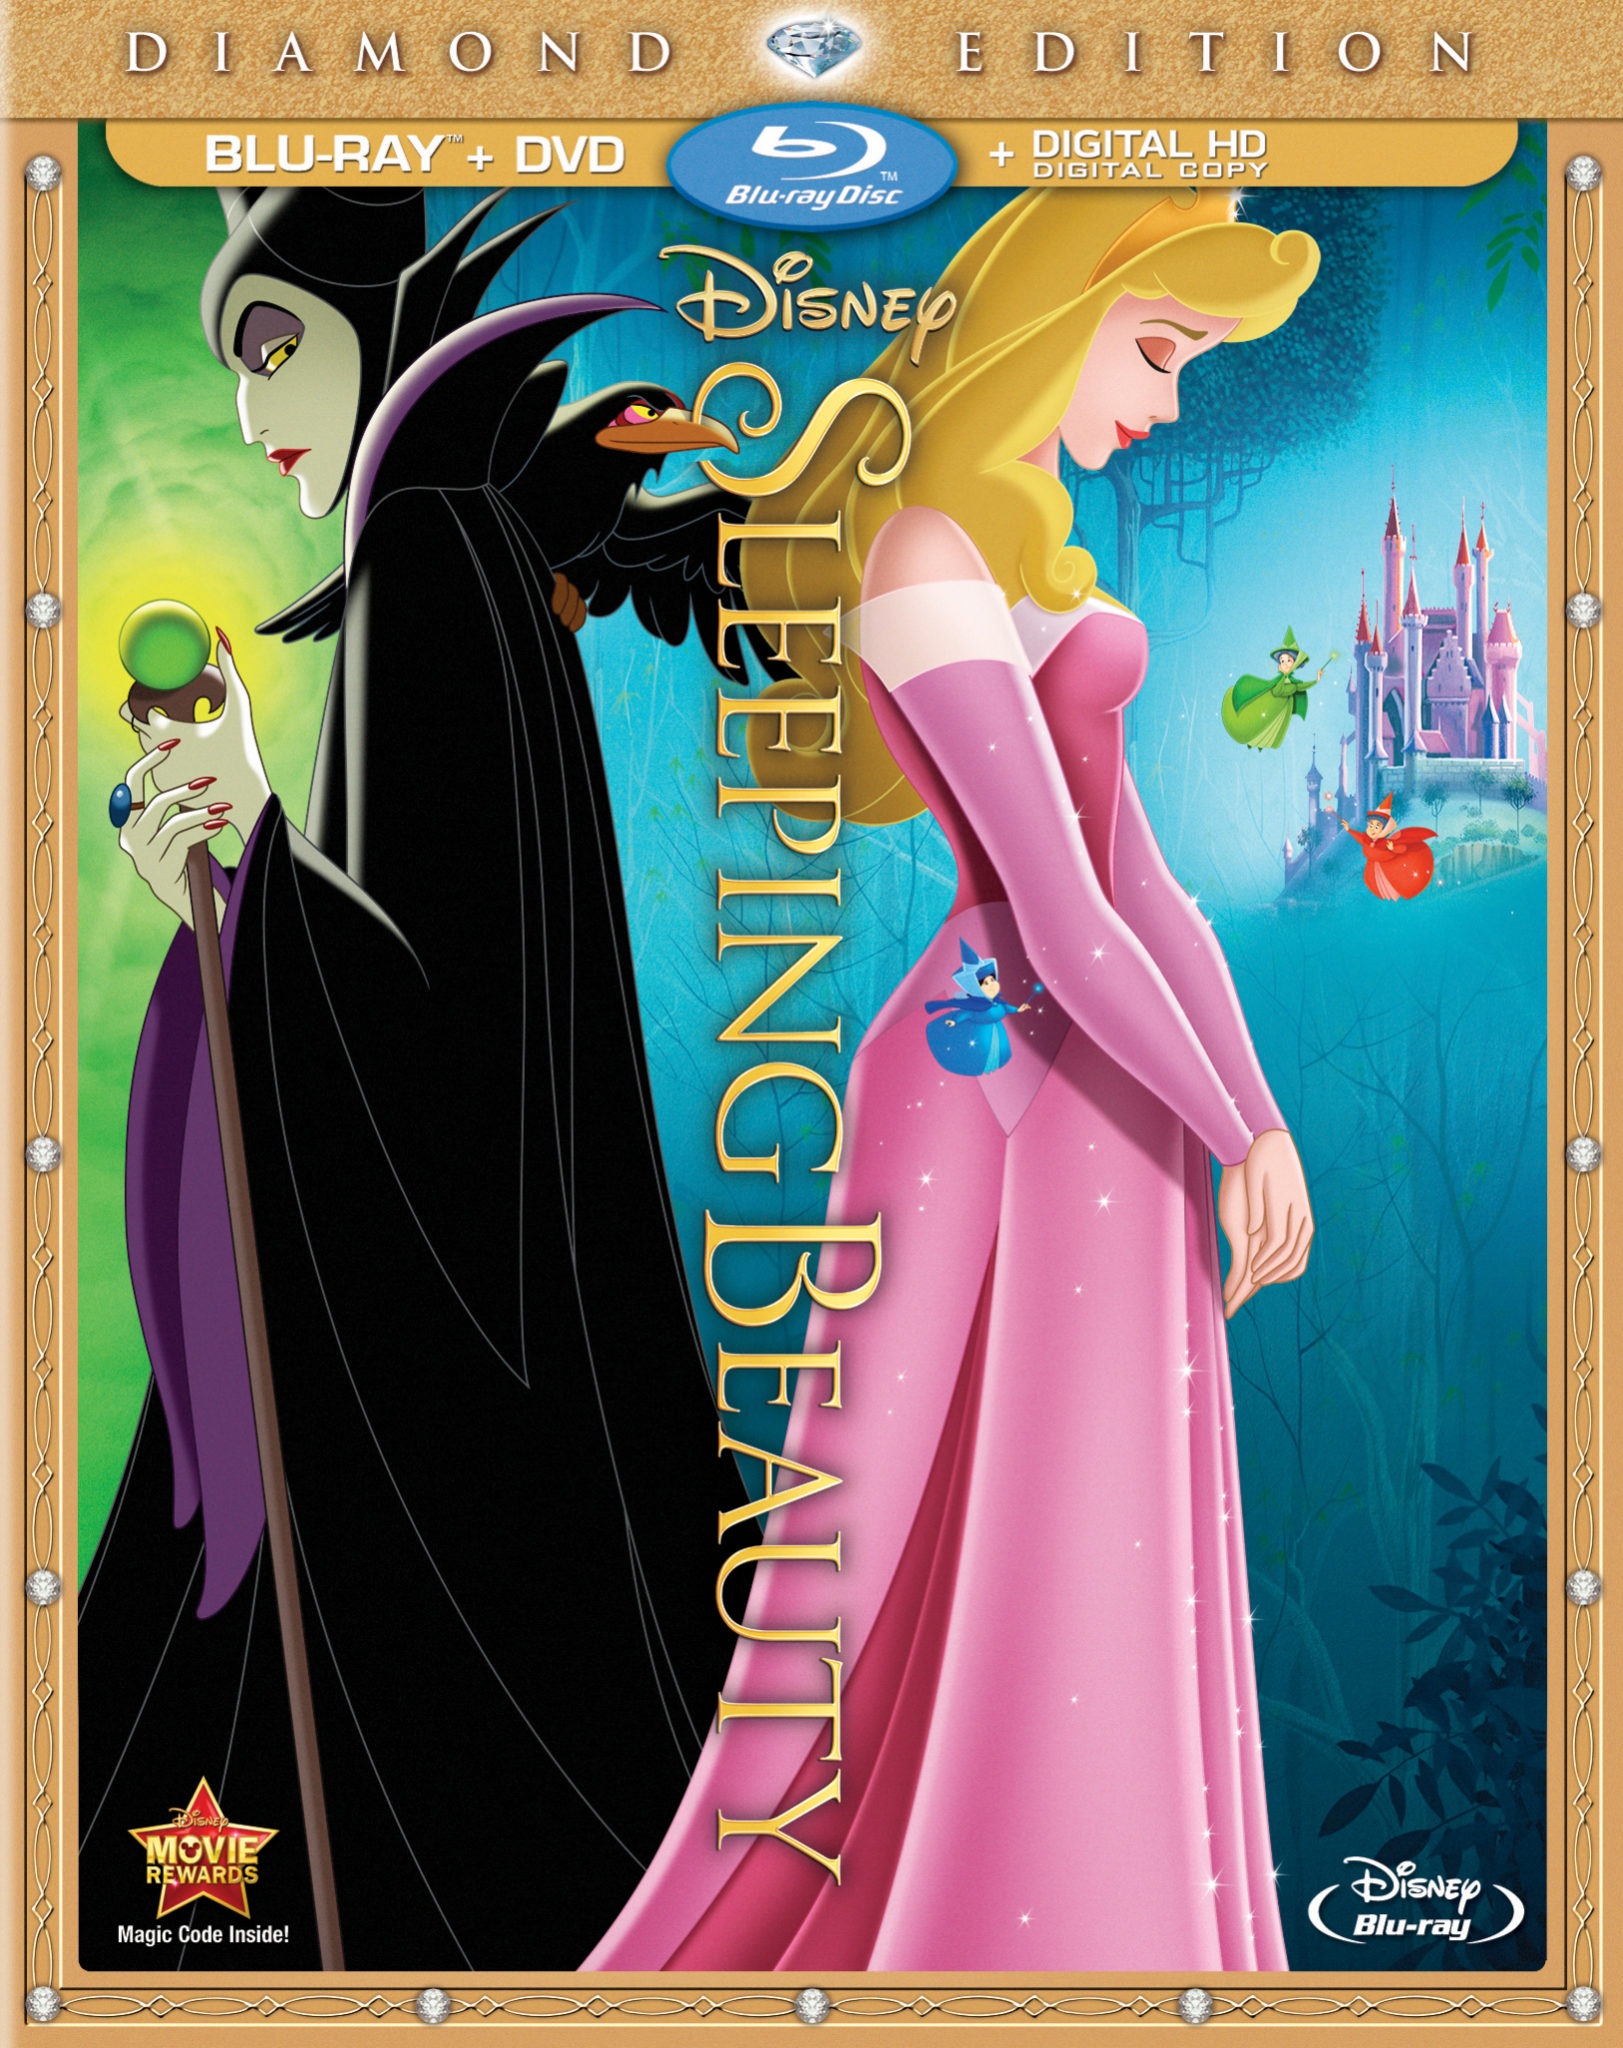 Check Out Two New 'Sleeping Beauty' Deleted Scenes - Rotoscopers